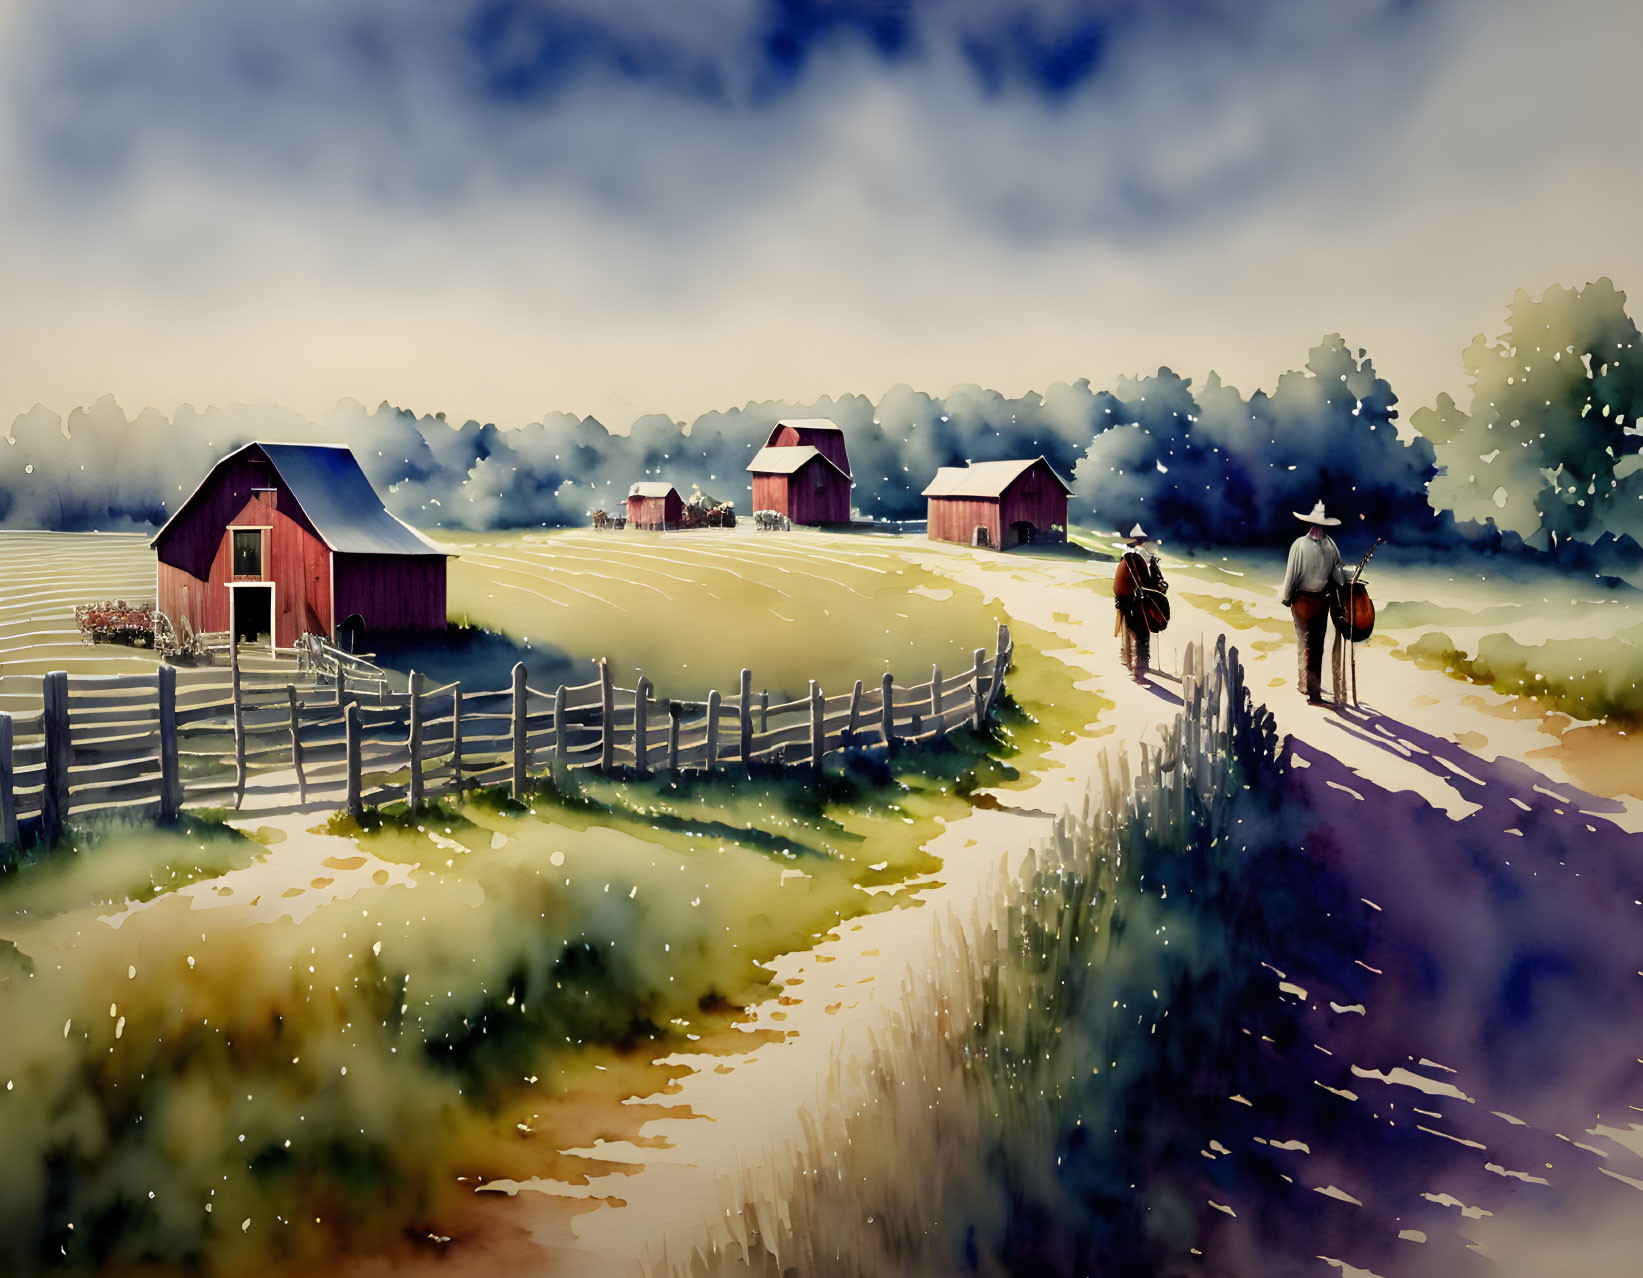 Rural watercolor painting of person on horse near red barns